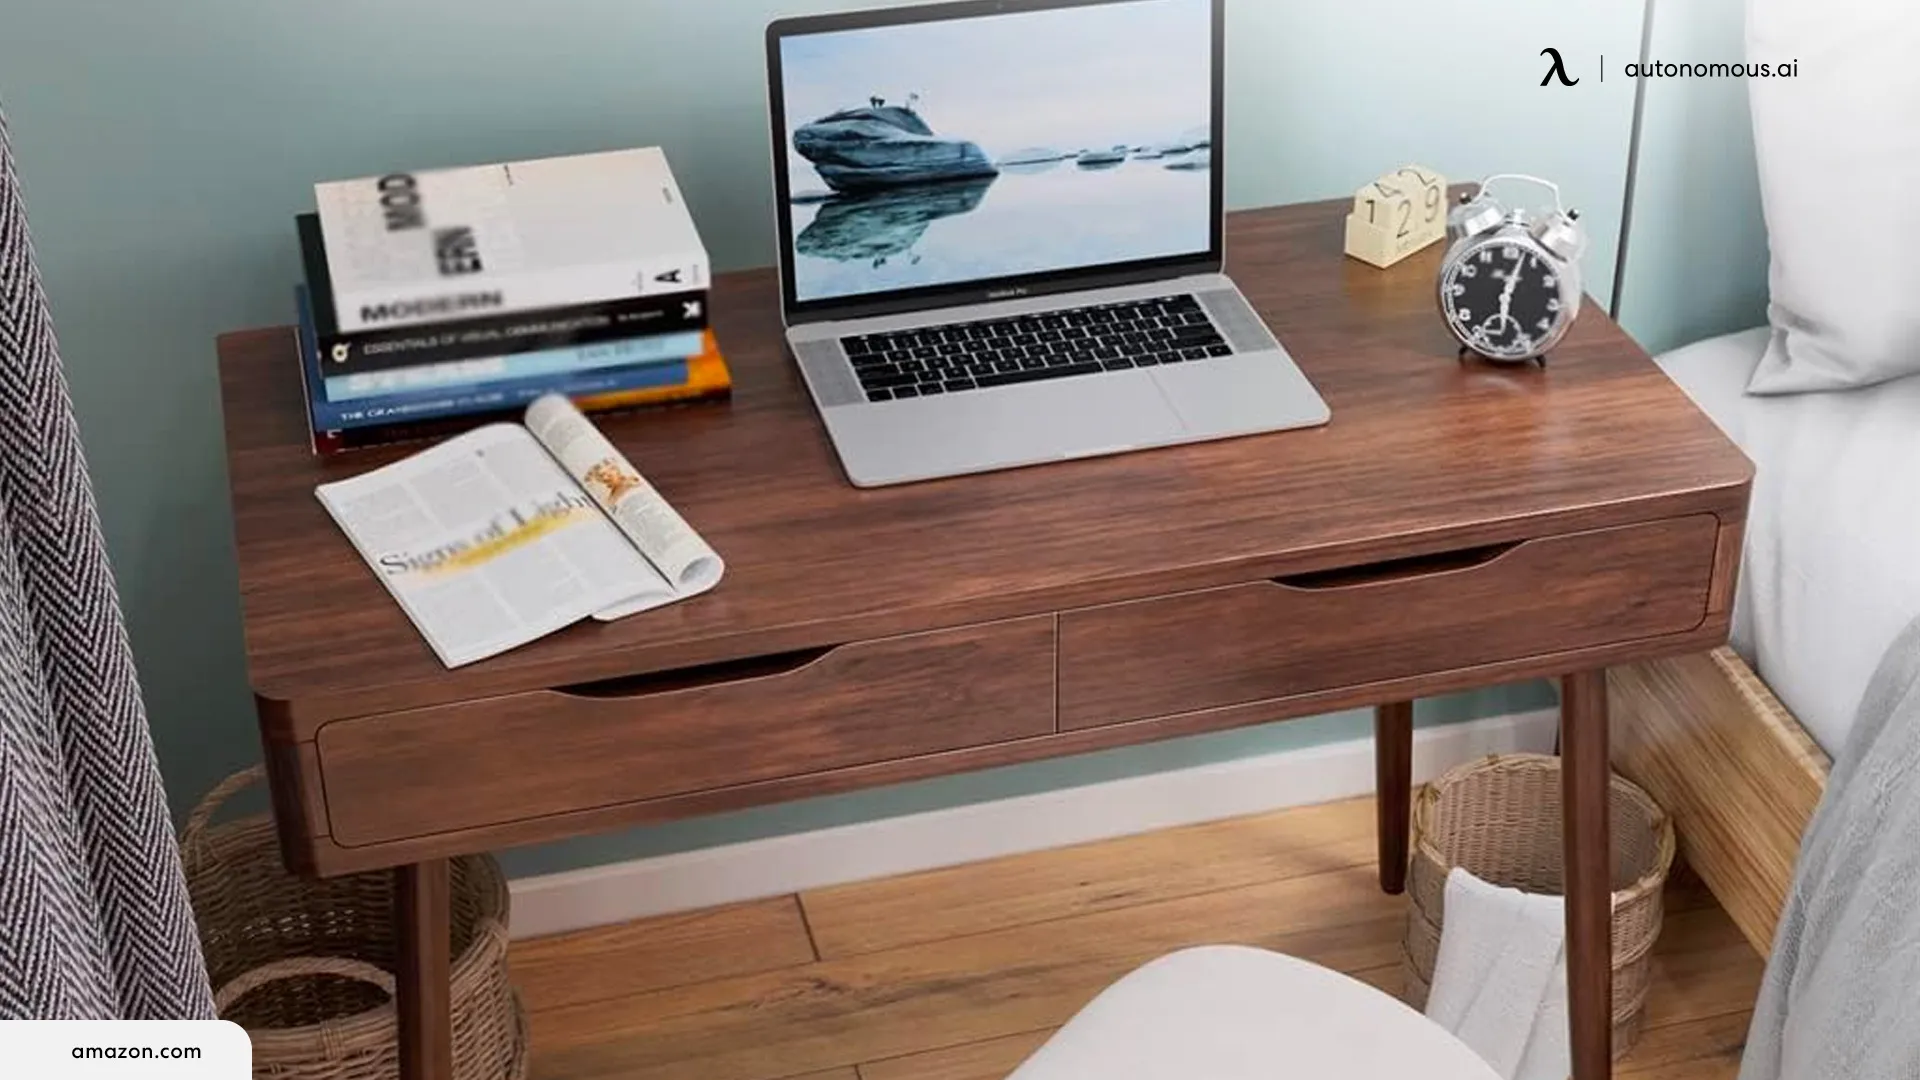 Why Should You Get a Mid-century Modern Desk